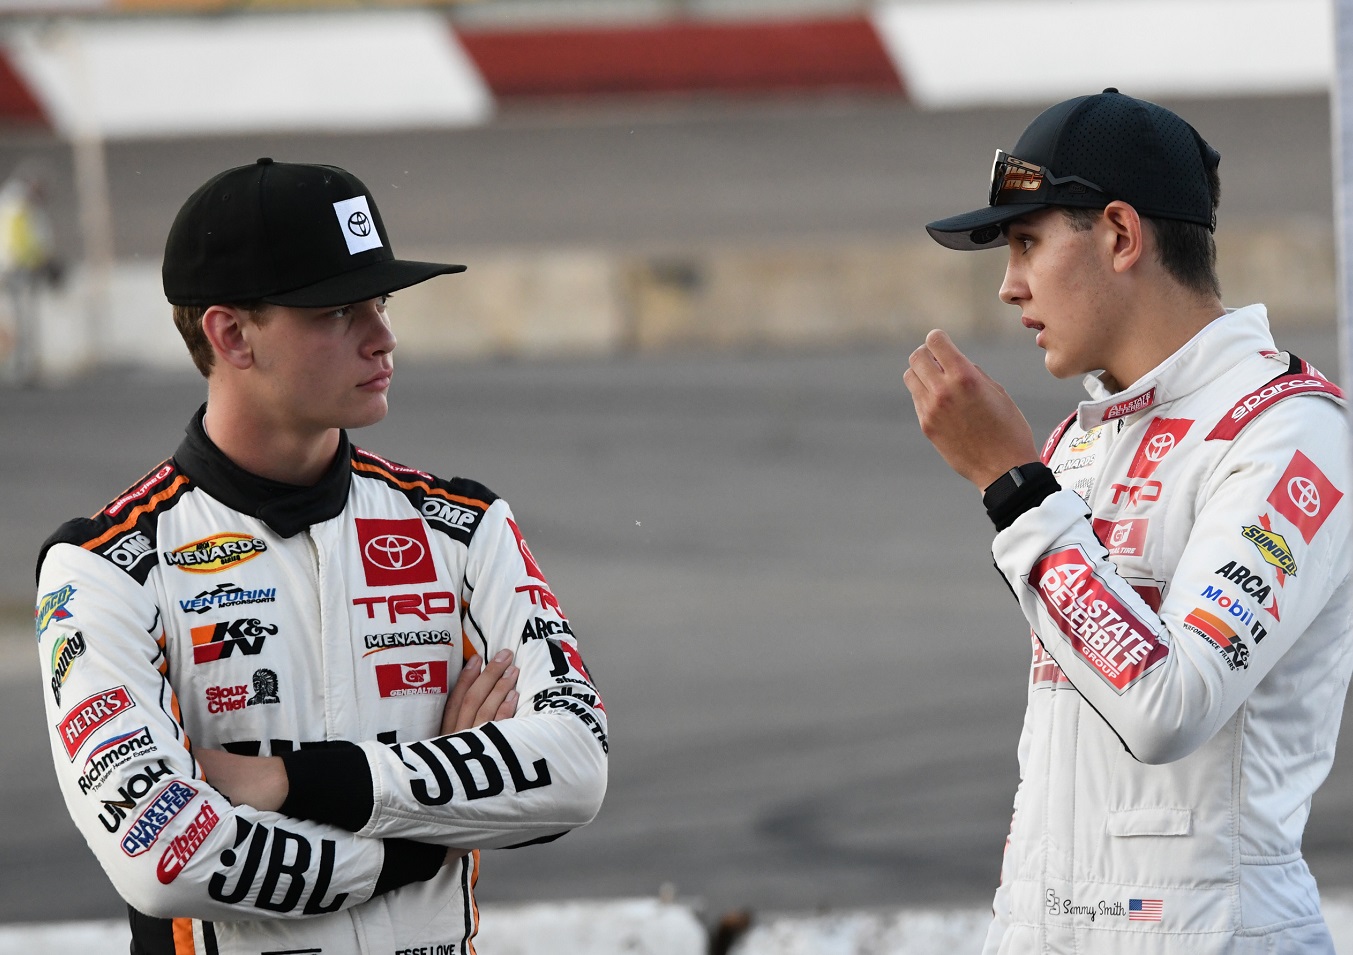 Jesse Love, left, talks with Sammy Smith during driver introductions for the ARCA Menards Series Menards 250 on June 25, 2022, at Elko Speedway in Elko New Market, Minnesota. | Josh Holmberg/Icon Sportswire via Getty Images